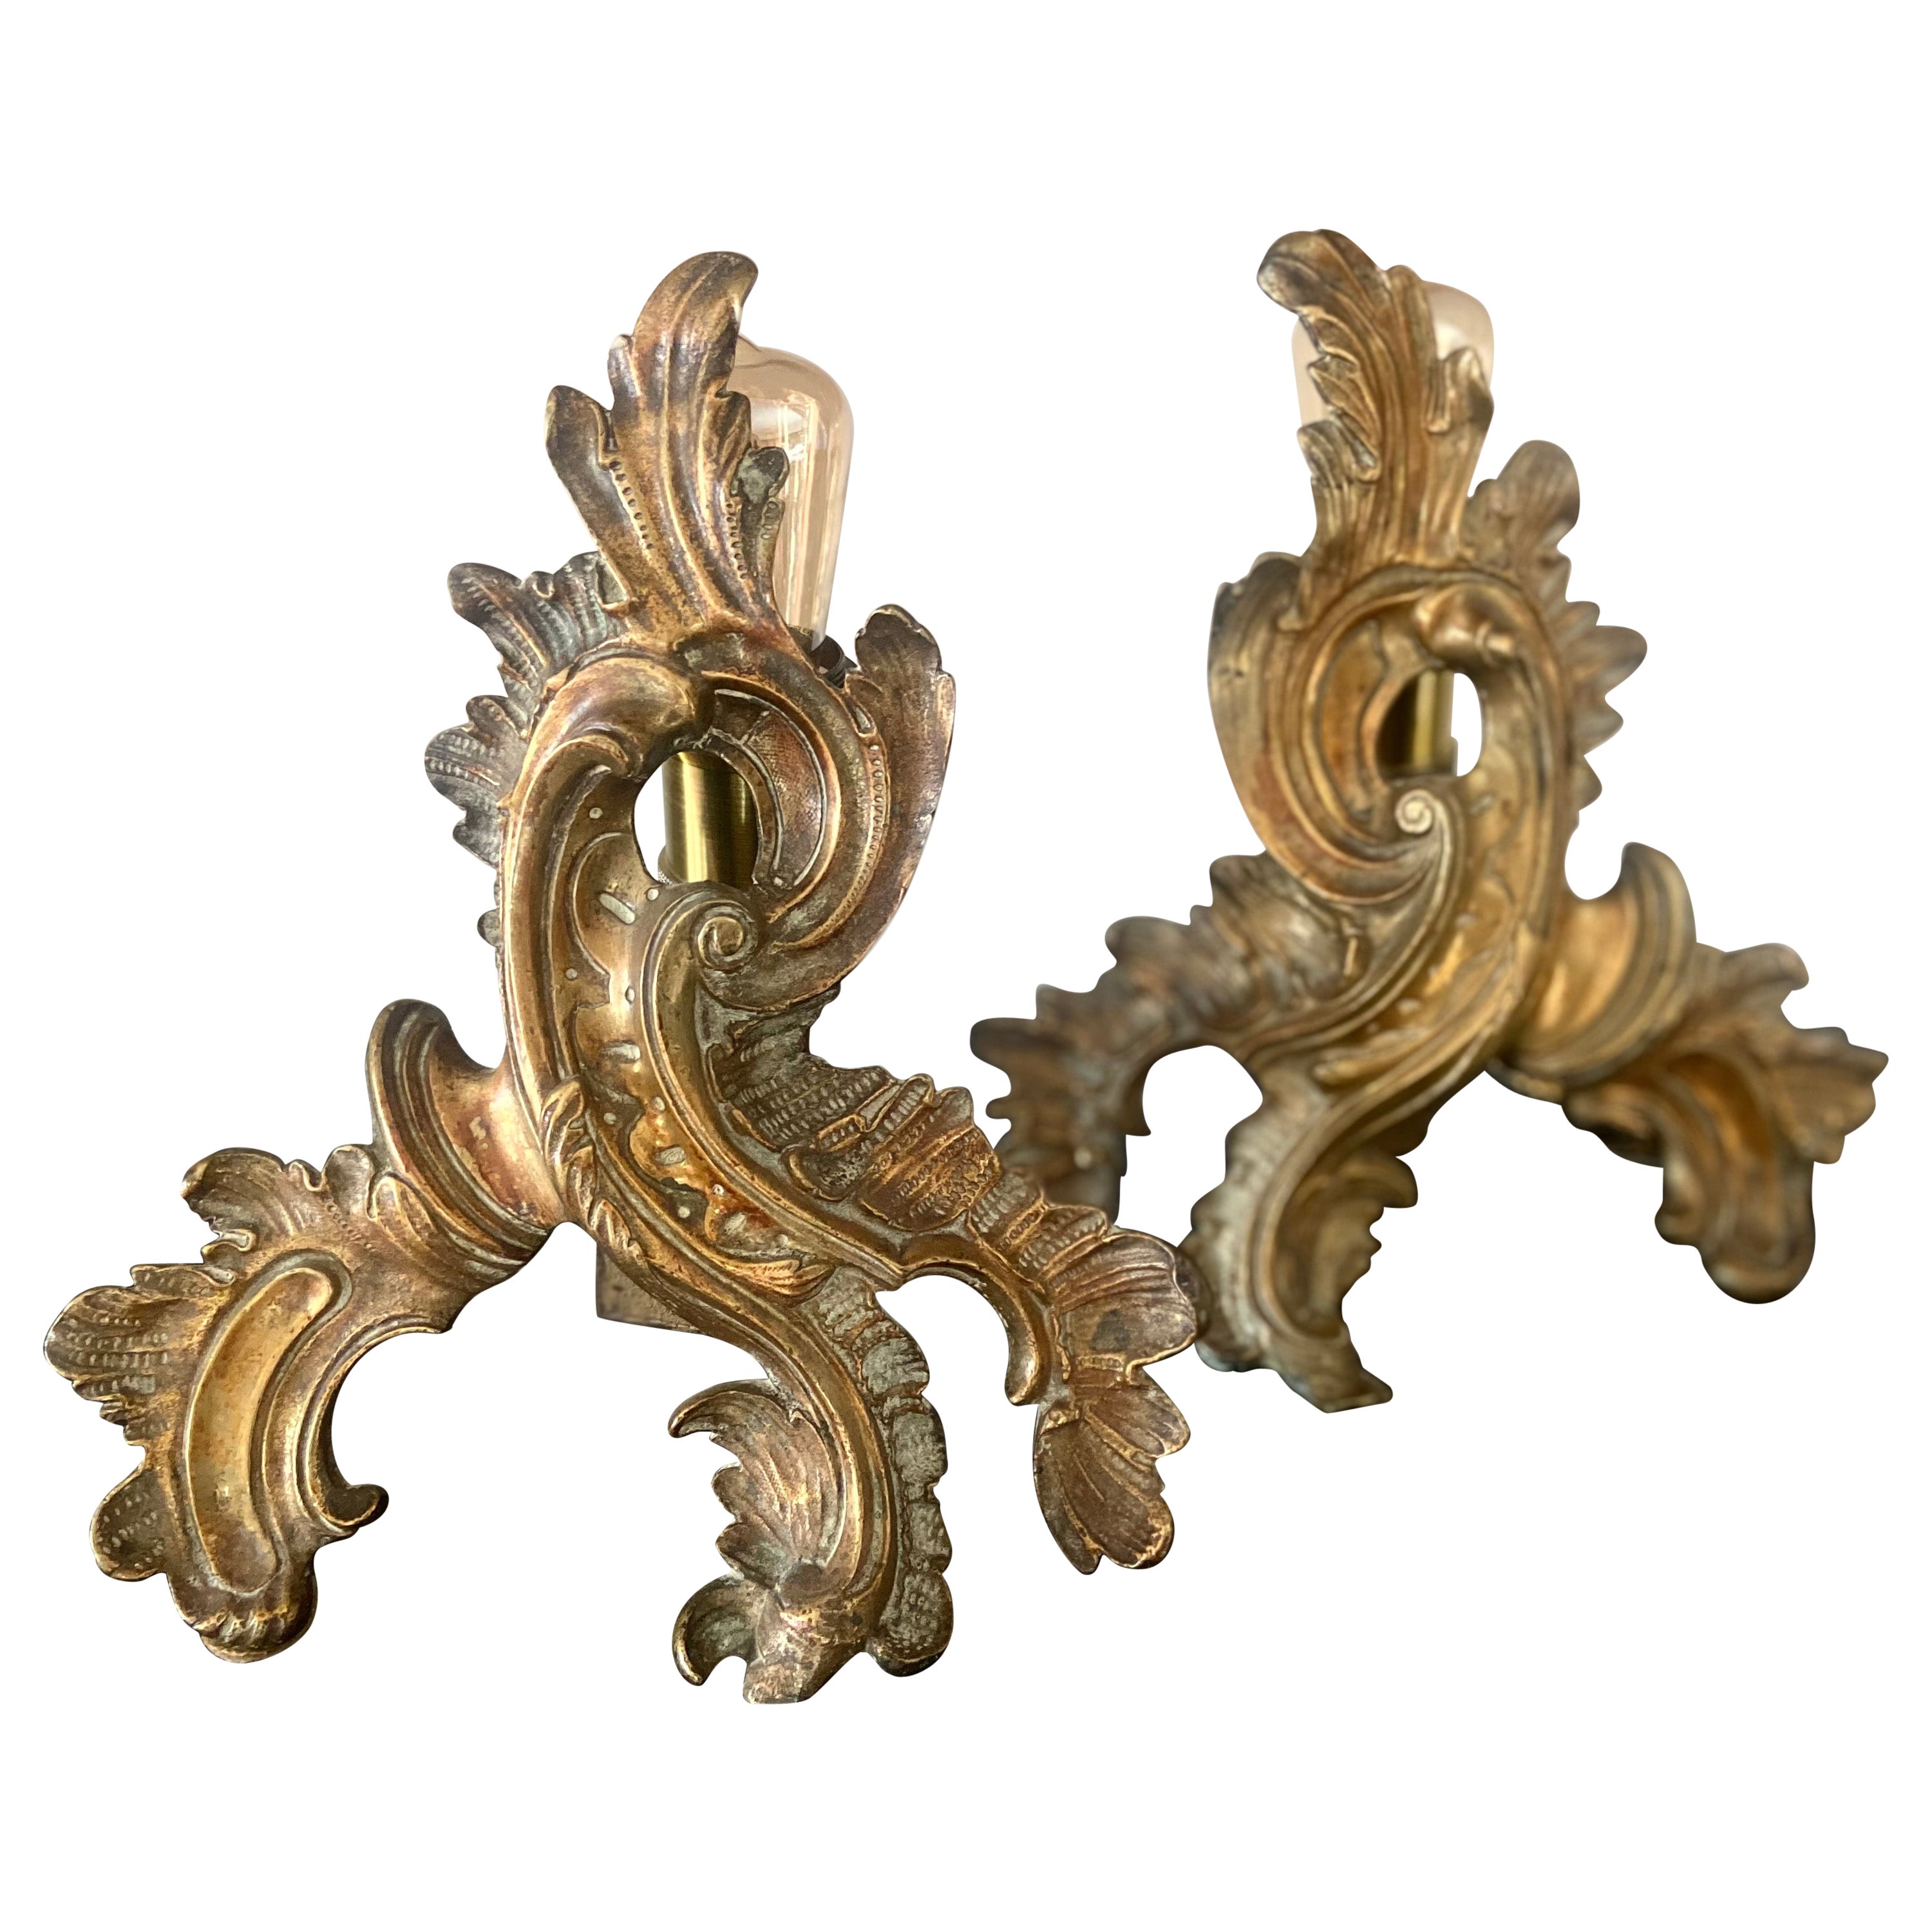 19th Century Pair of Table Lamps Made of French Electrified Bronze Fire Dogs For Sale